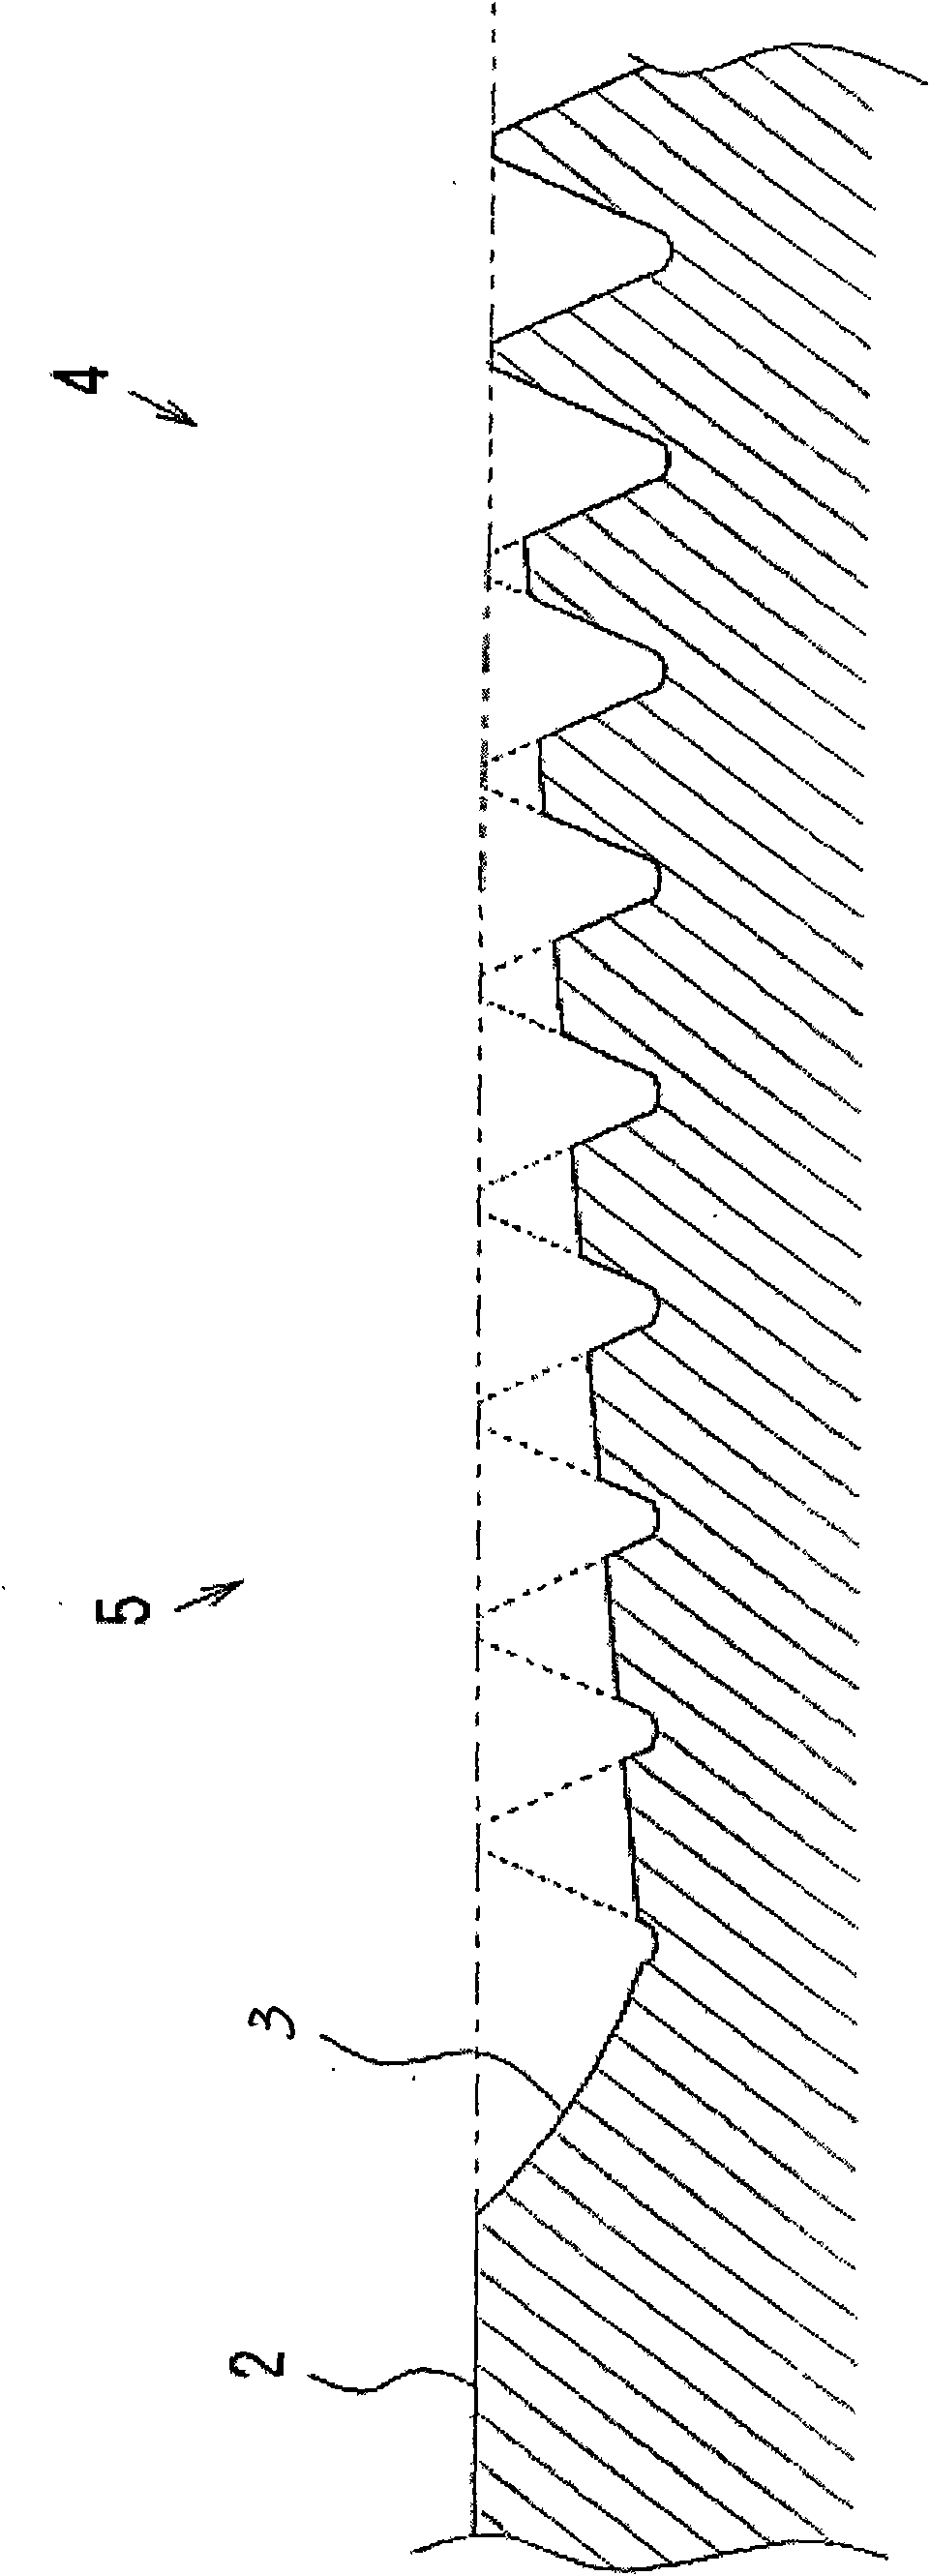 Method for improving fatigue strength of bolt through combination of bolt and connecting piece material